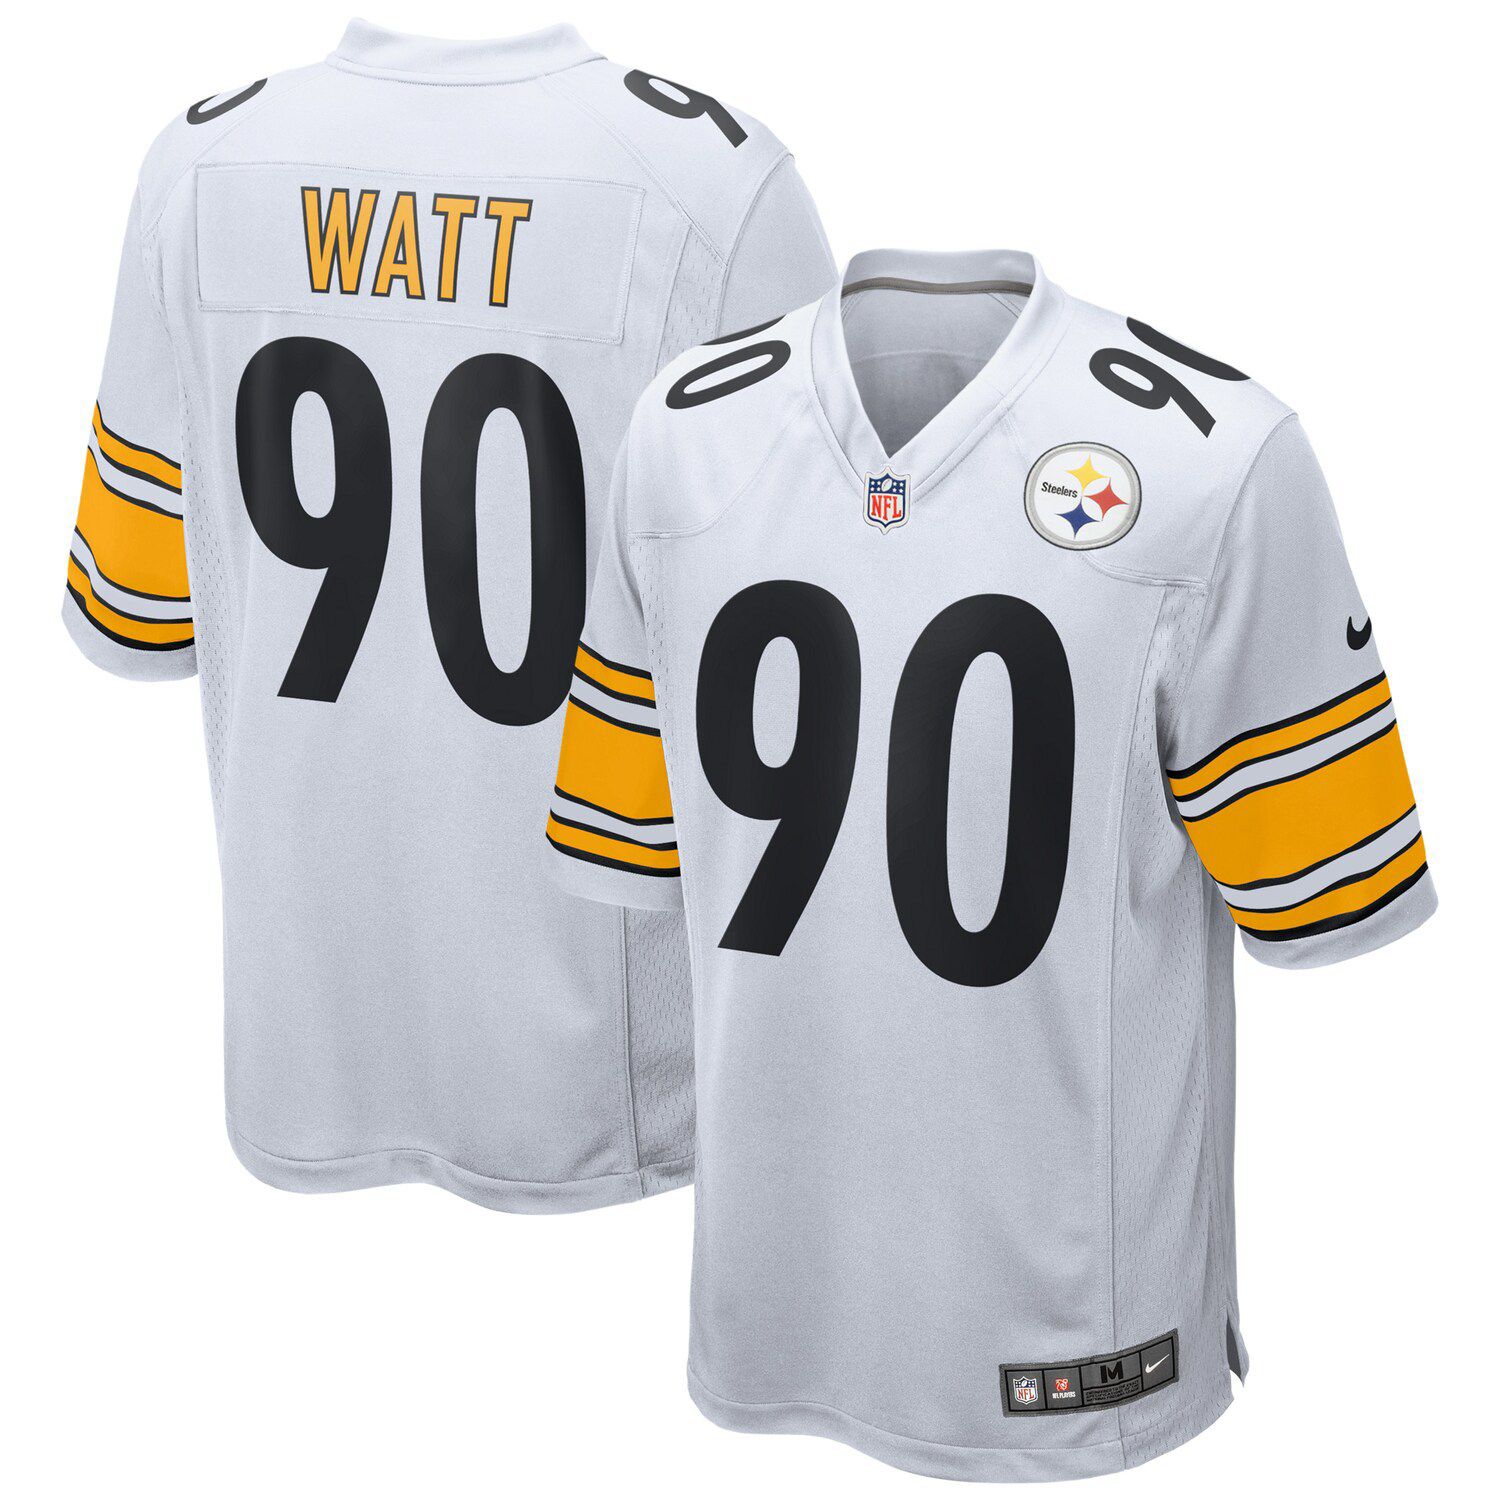 child steelers jersey